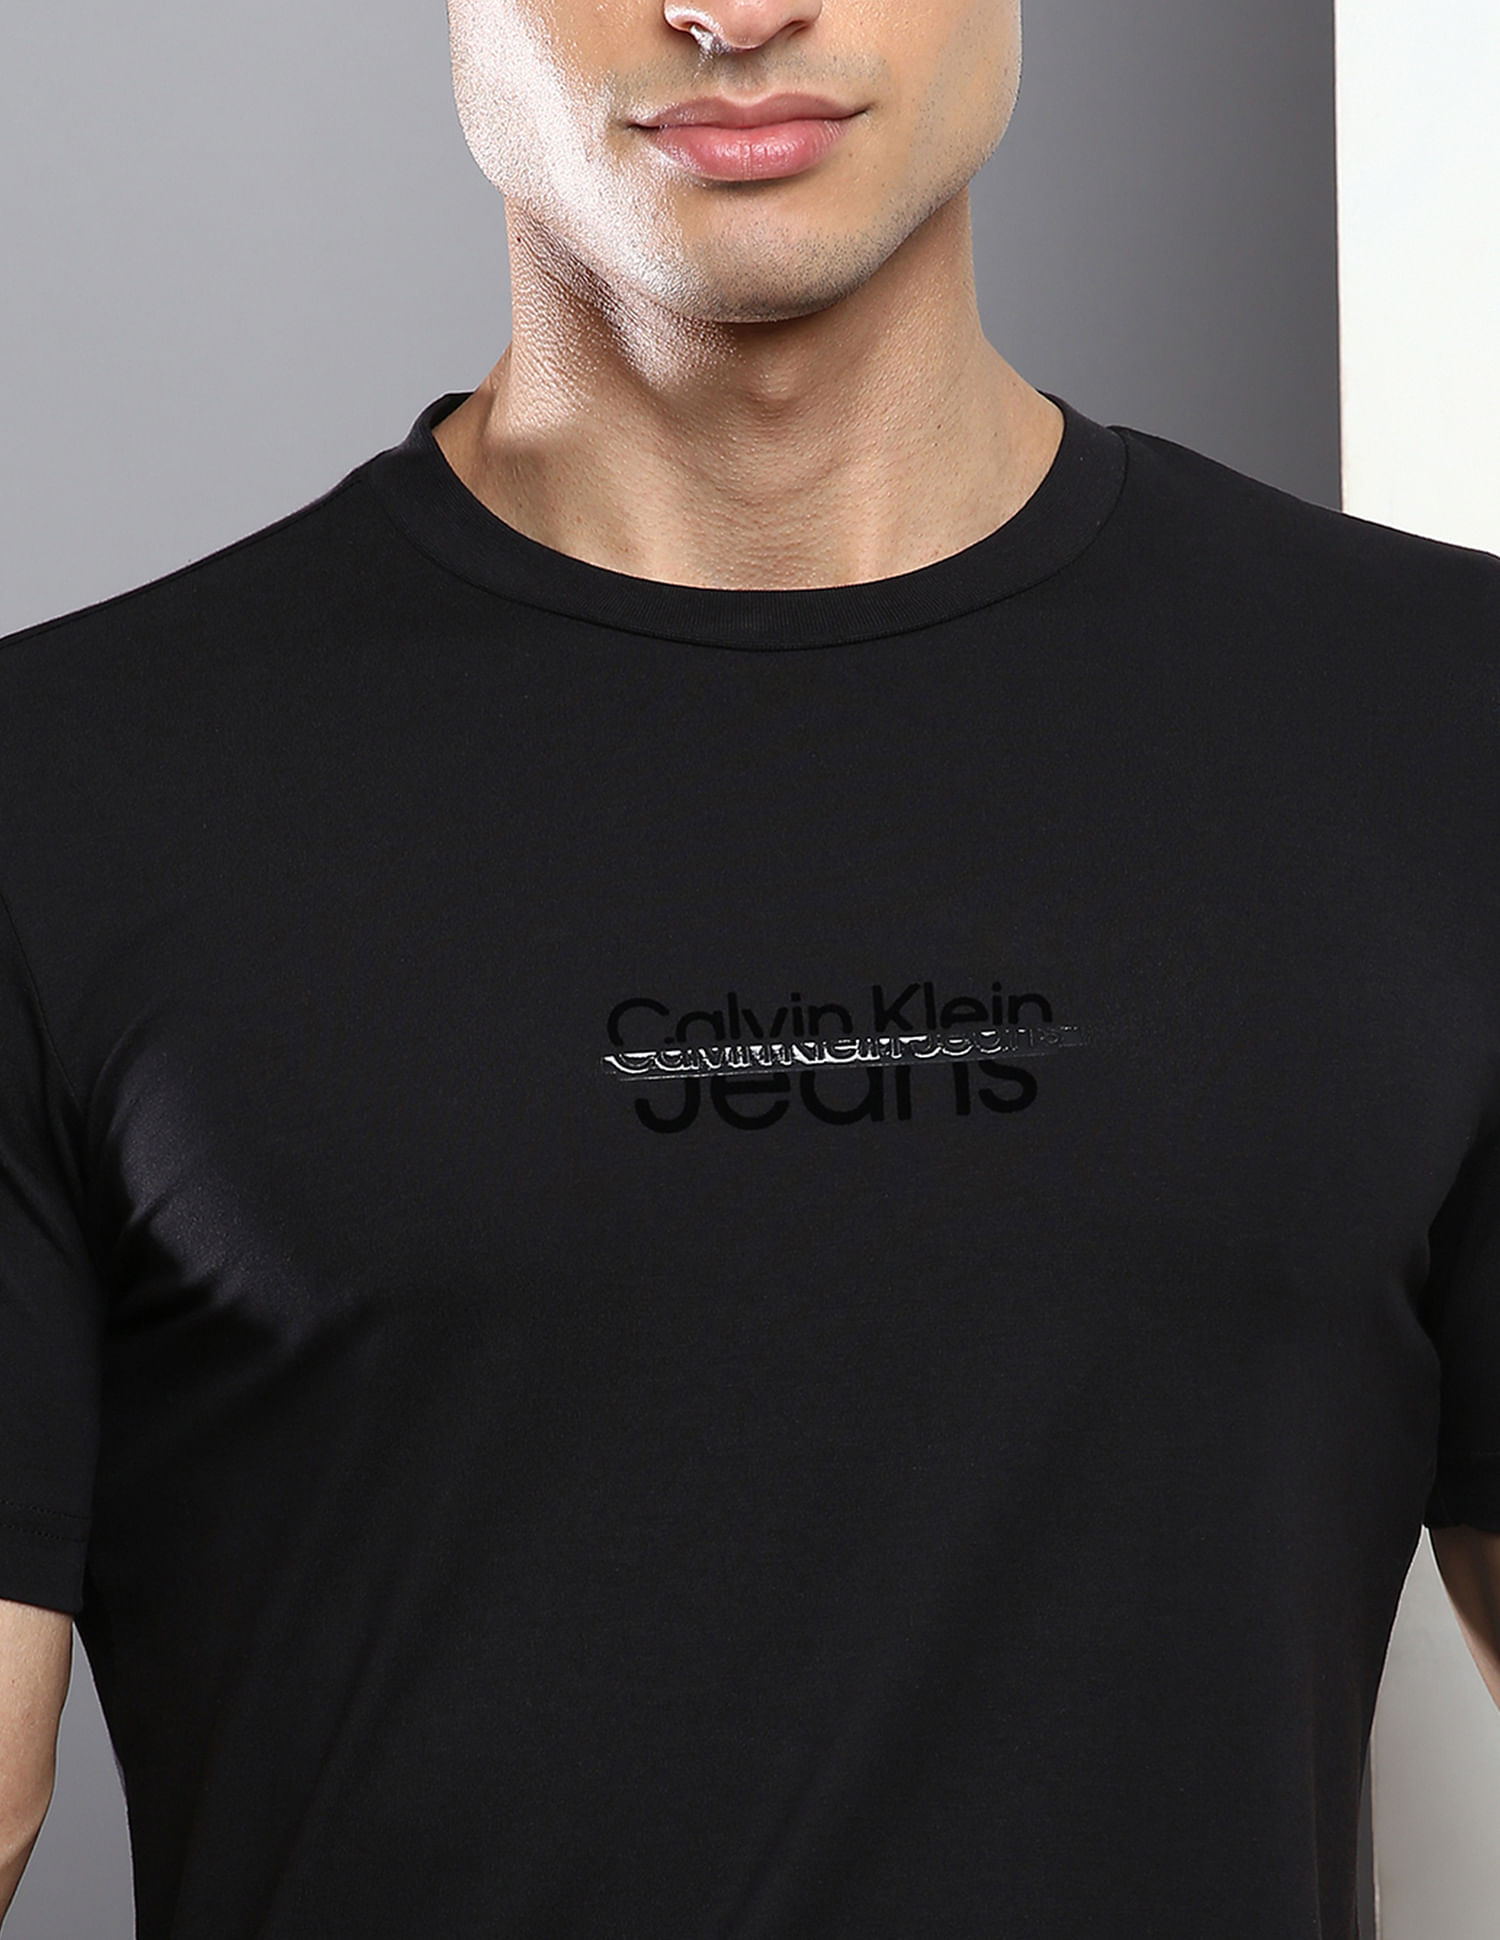 CALVIN KLEIN JEANS - Men's T-shirt with disrupted logo - black